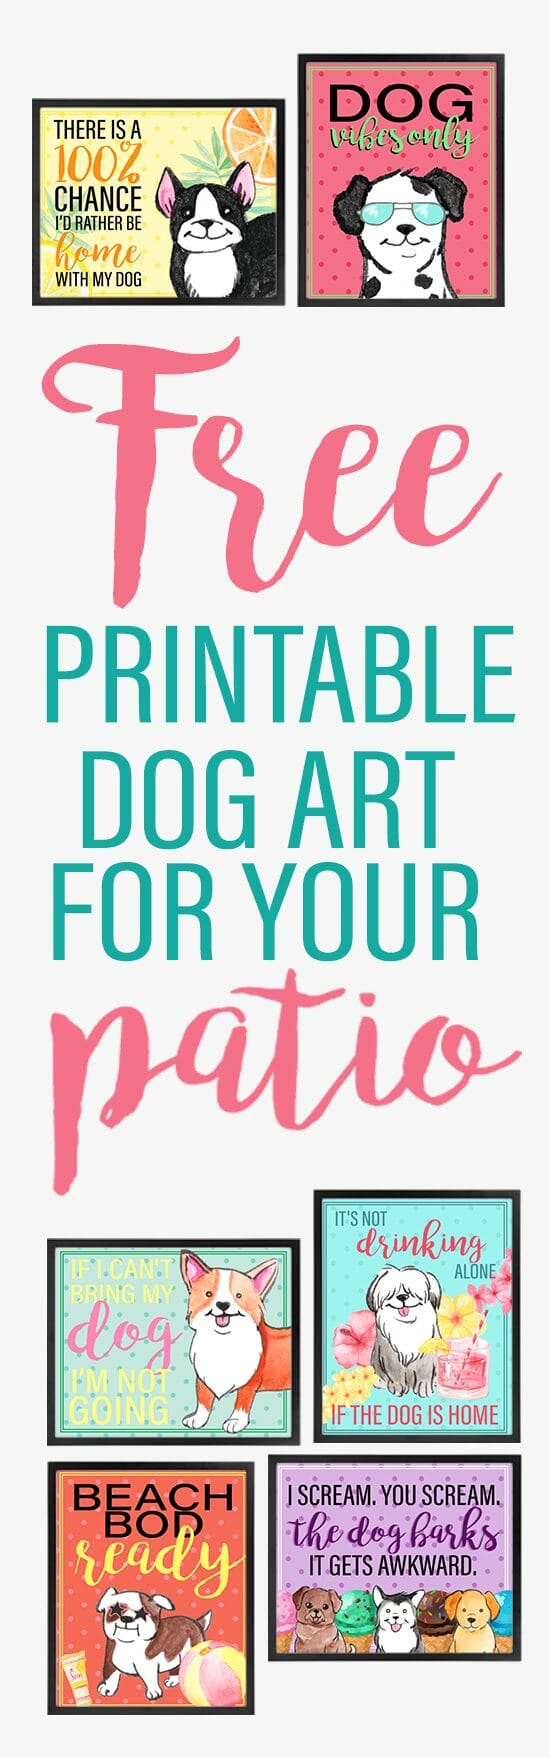 small thumbnail previews of the summer dog printable art with the text: free printable dog art for your patio